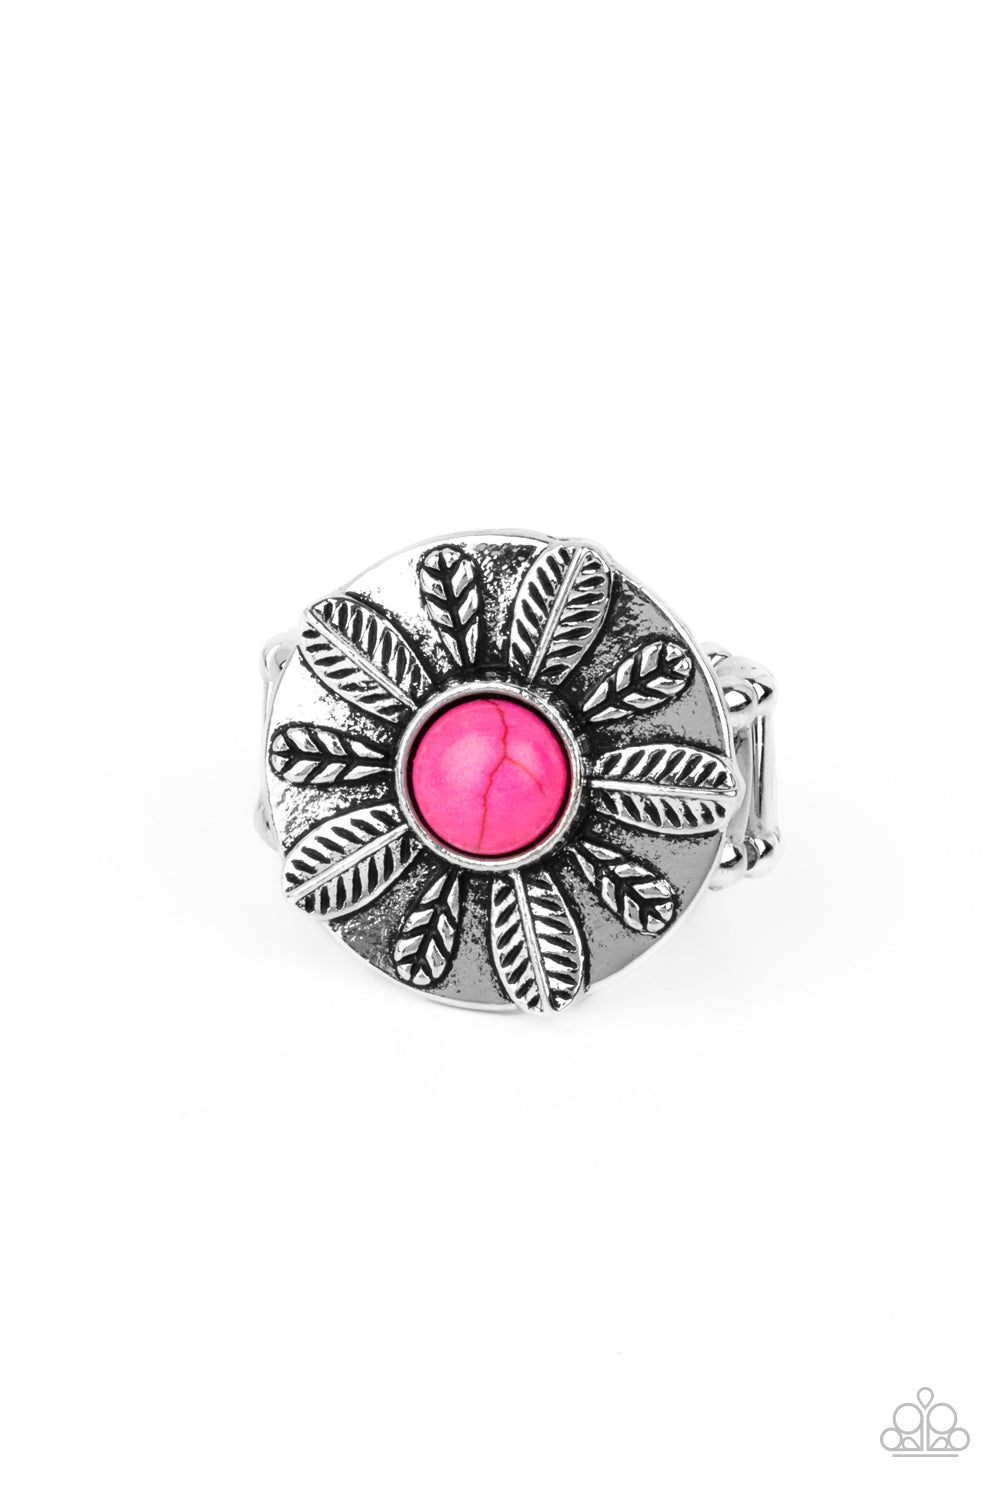 PALMS Reader - Pink Item #P4SE-PKXX-088XX An alternating collection of silver feathers and palm leaves fan out from a vivacious pink stone center atop a silver disc, creating a colorful display atop the finger. Features a stretchy band for a flexible fit.  Sold as one individual ring.